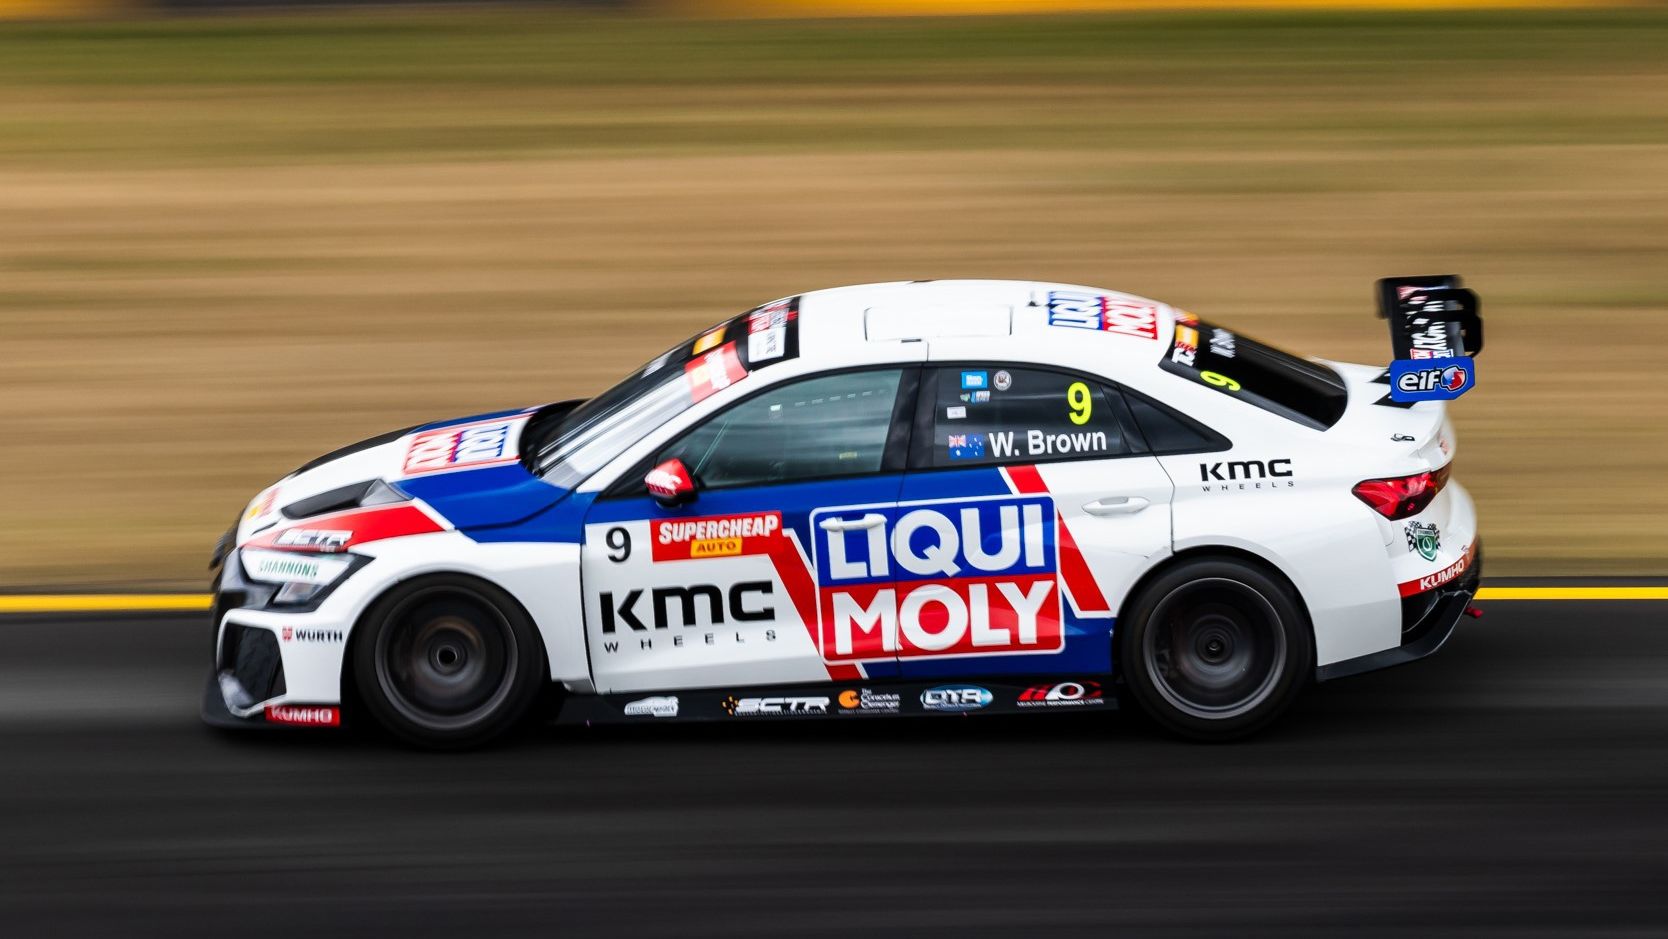 Will Brown in his Audi RS 3 LMS took victory in race one and two of the TCR World Tour at Sydney Motorsport Park.